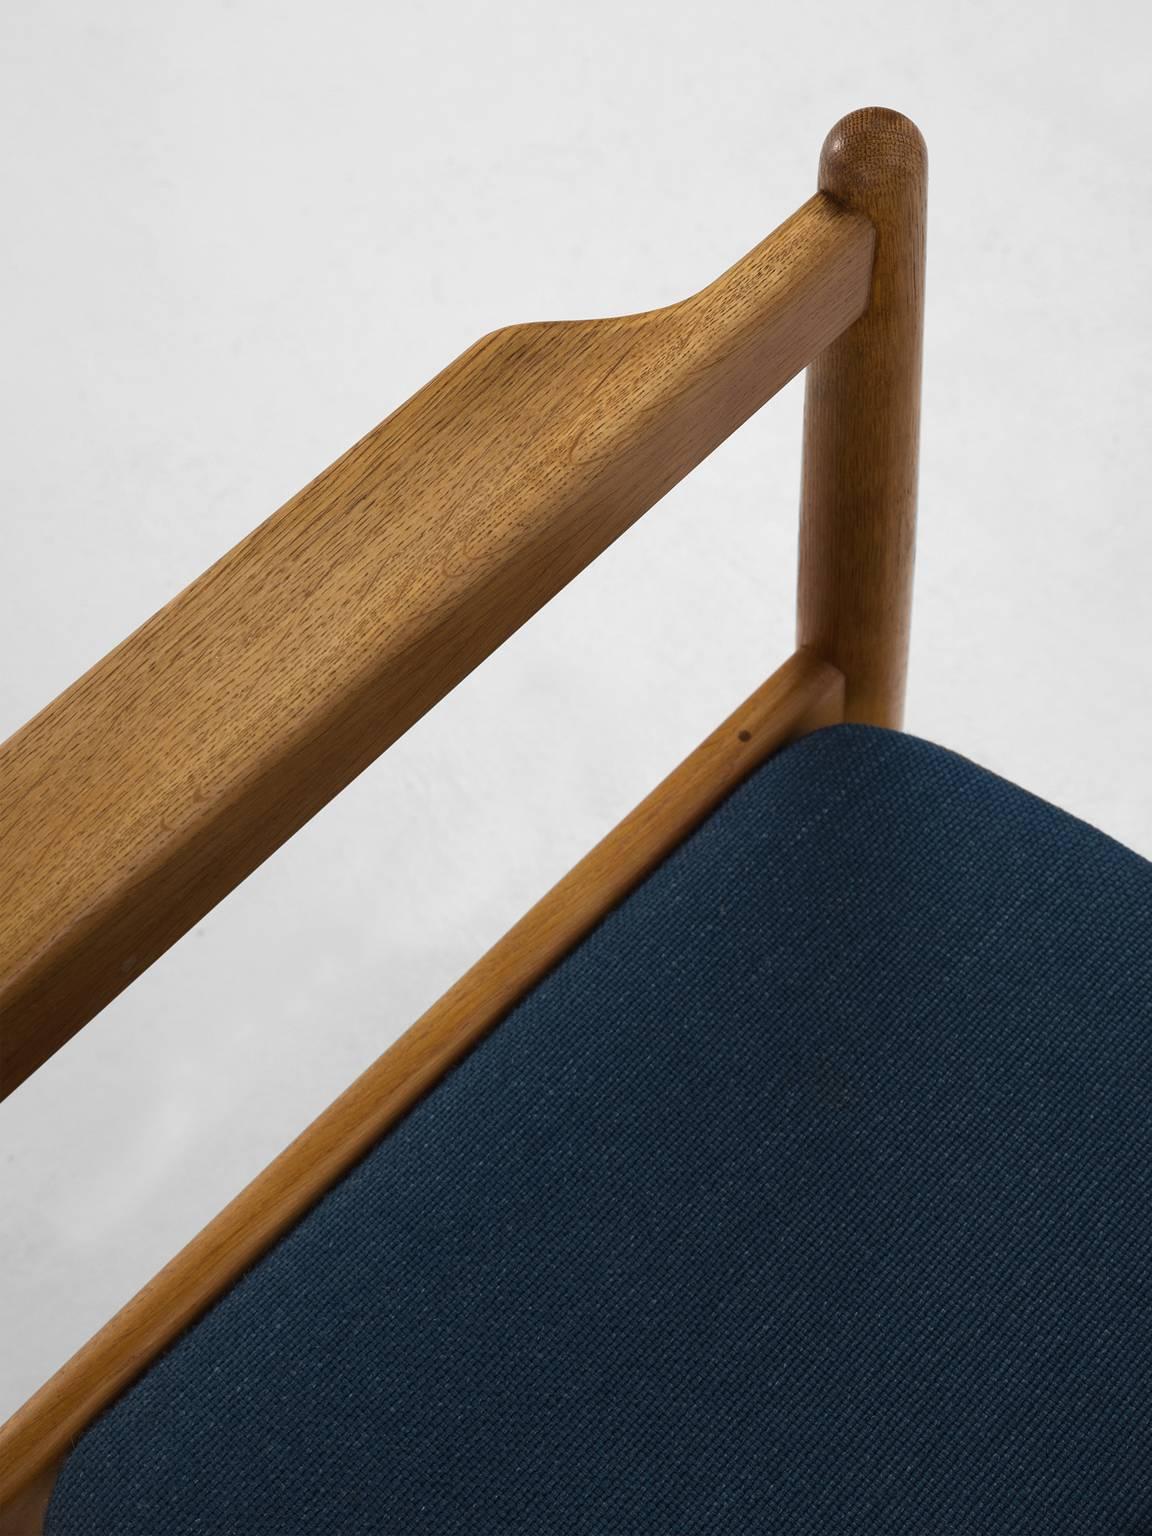 Fabric 12 Børge Mogensen for Karl Andersson Dining Chairs